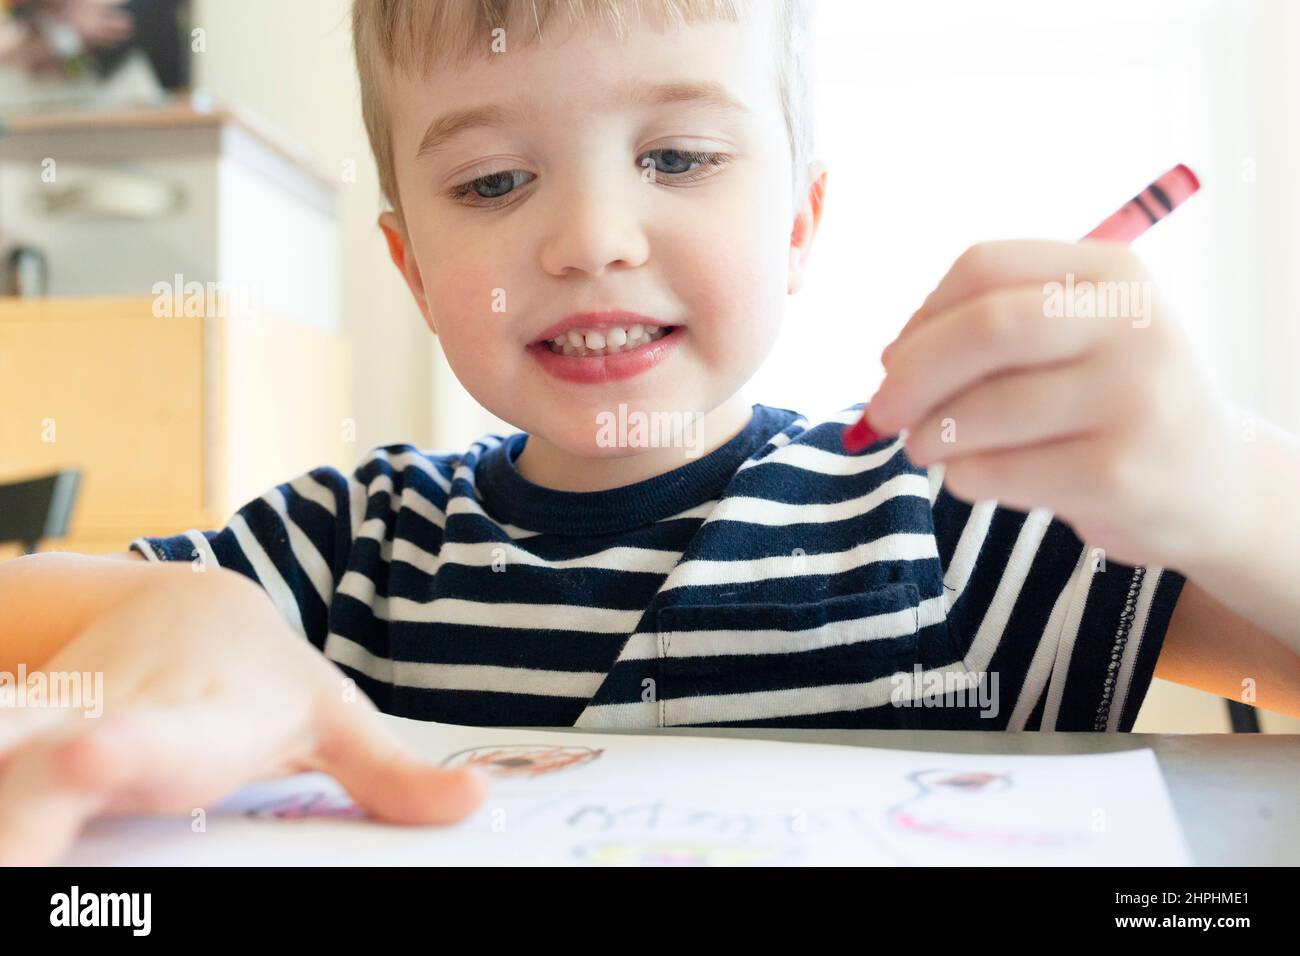 Preschool Age Boy Holds Red Crayon in Hand While Drawing Stock Photo